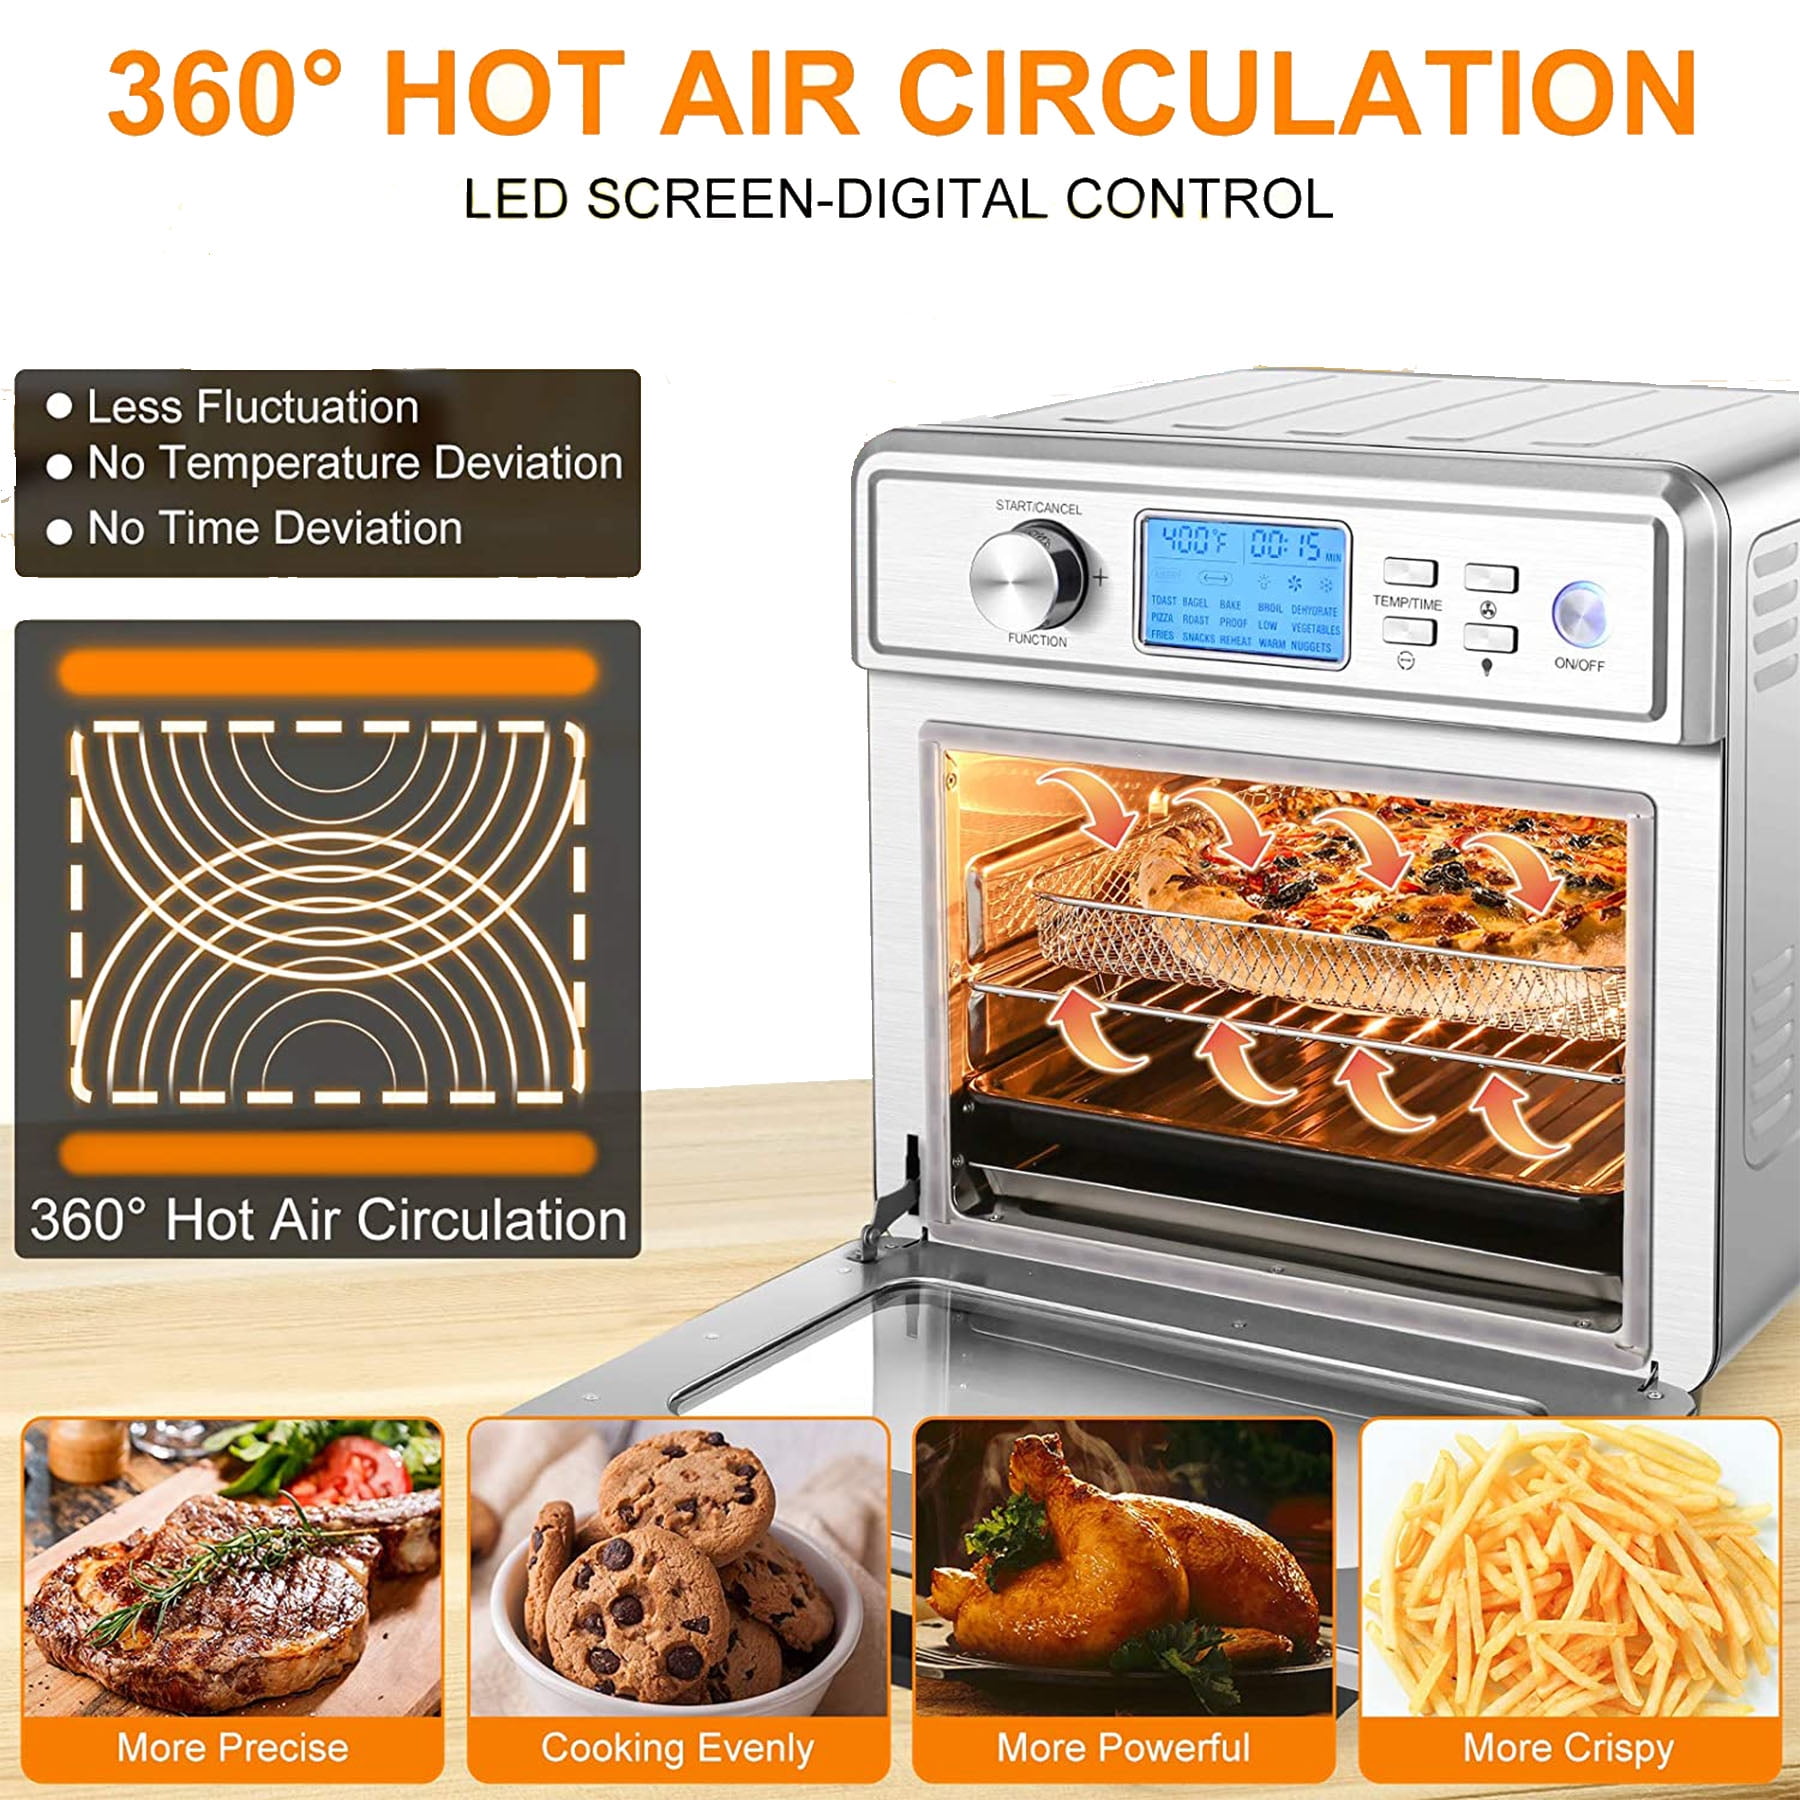 ASDFGH Household Electric Oven Mini Oven Multi-function Automatic Baking Machine Independent Temperature Control 11L Large Capacity Halogen Toaster Oven air fryer 